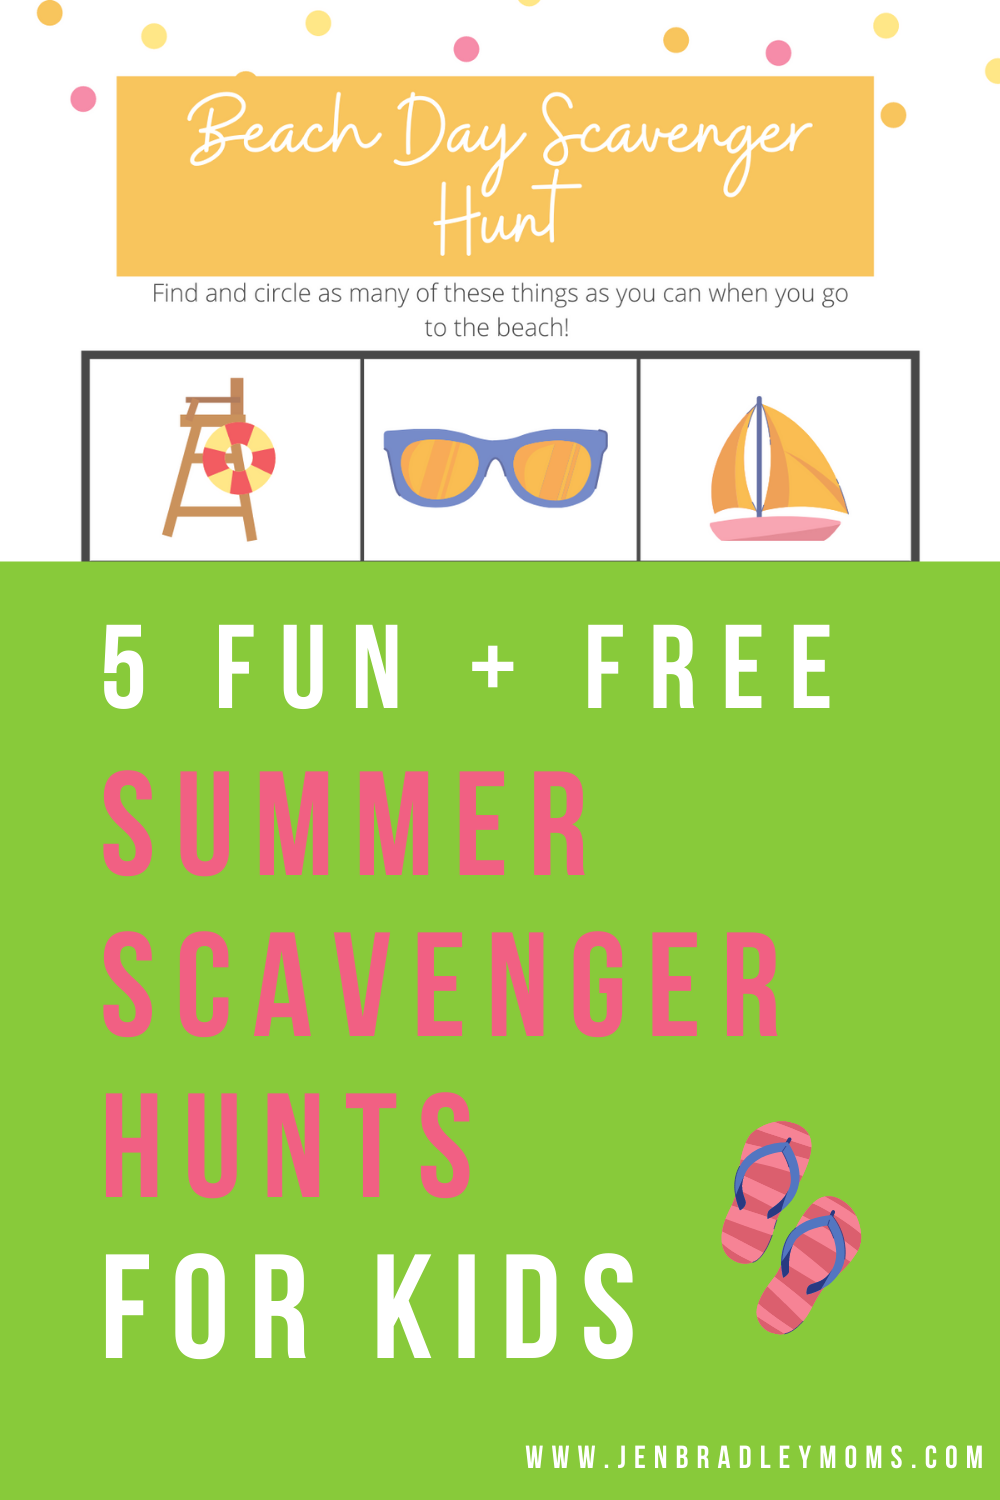 The Ultimate Camping Scavenger Hunt + 6 Free and Fun Summer Scavenger Hunts